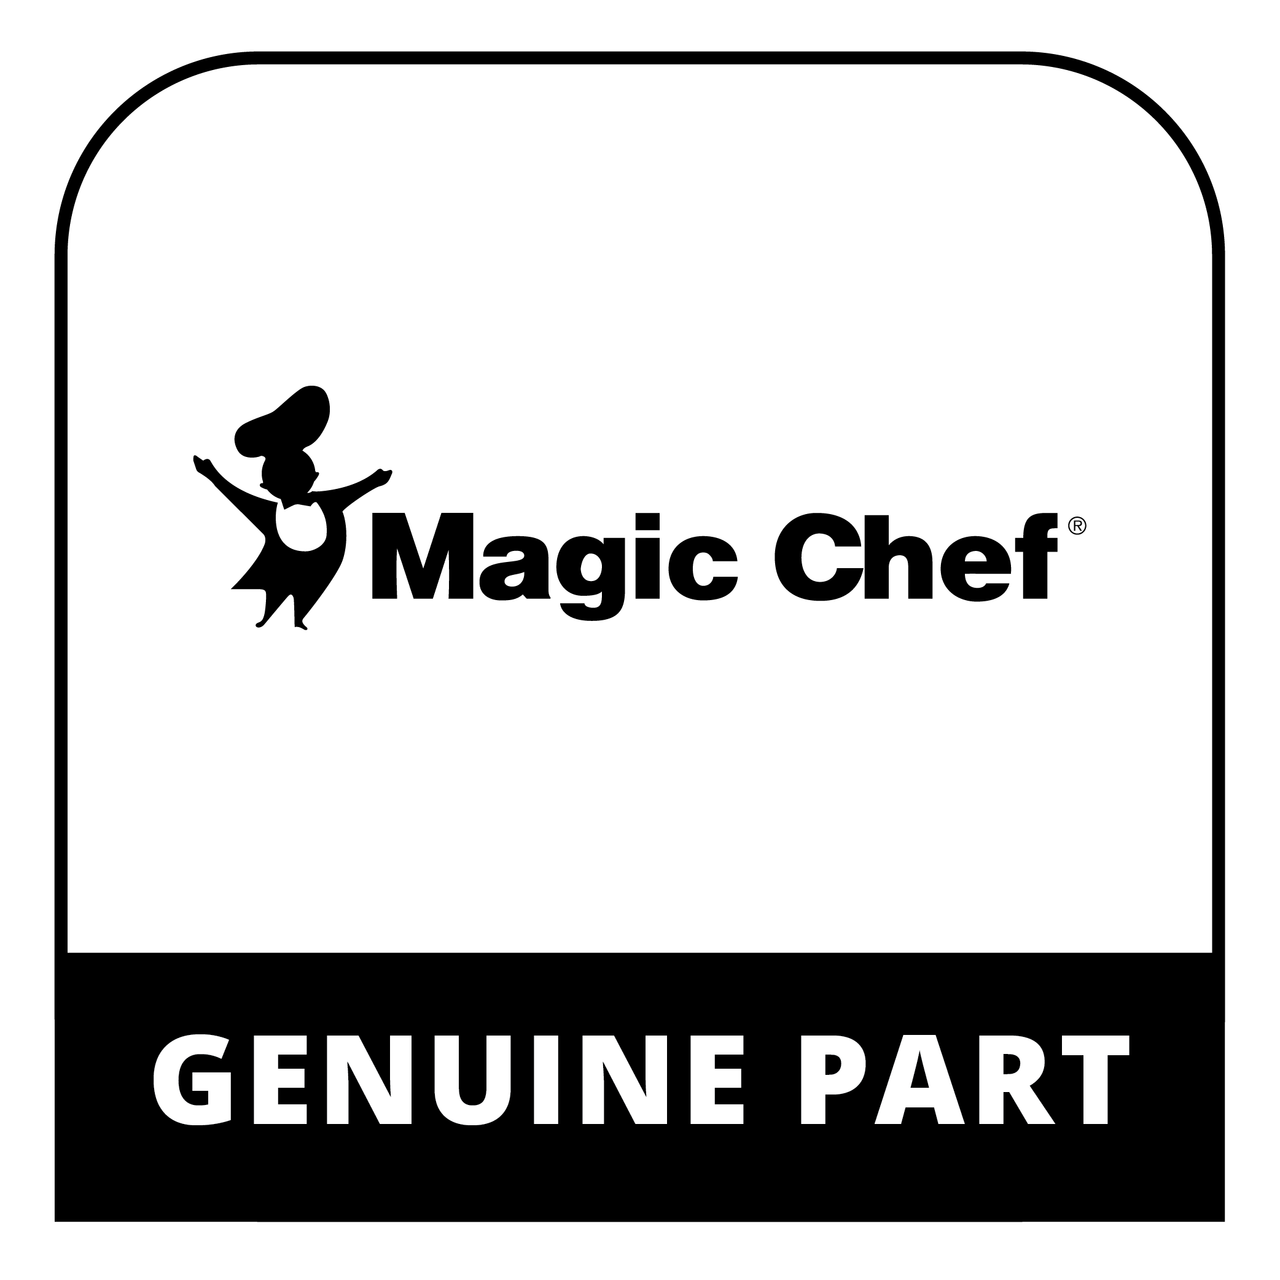 Magic Chef NPWDE01W-09 - HOT WATER FAUCET - Genuine Magic Chef Part